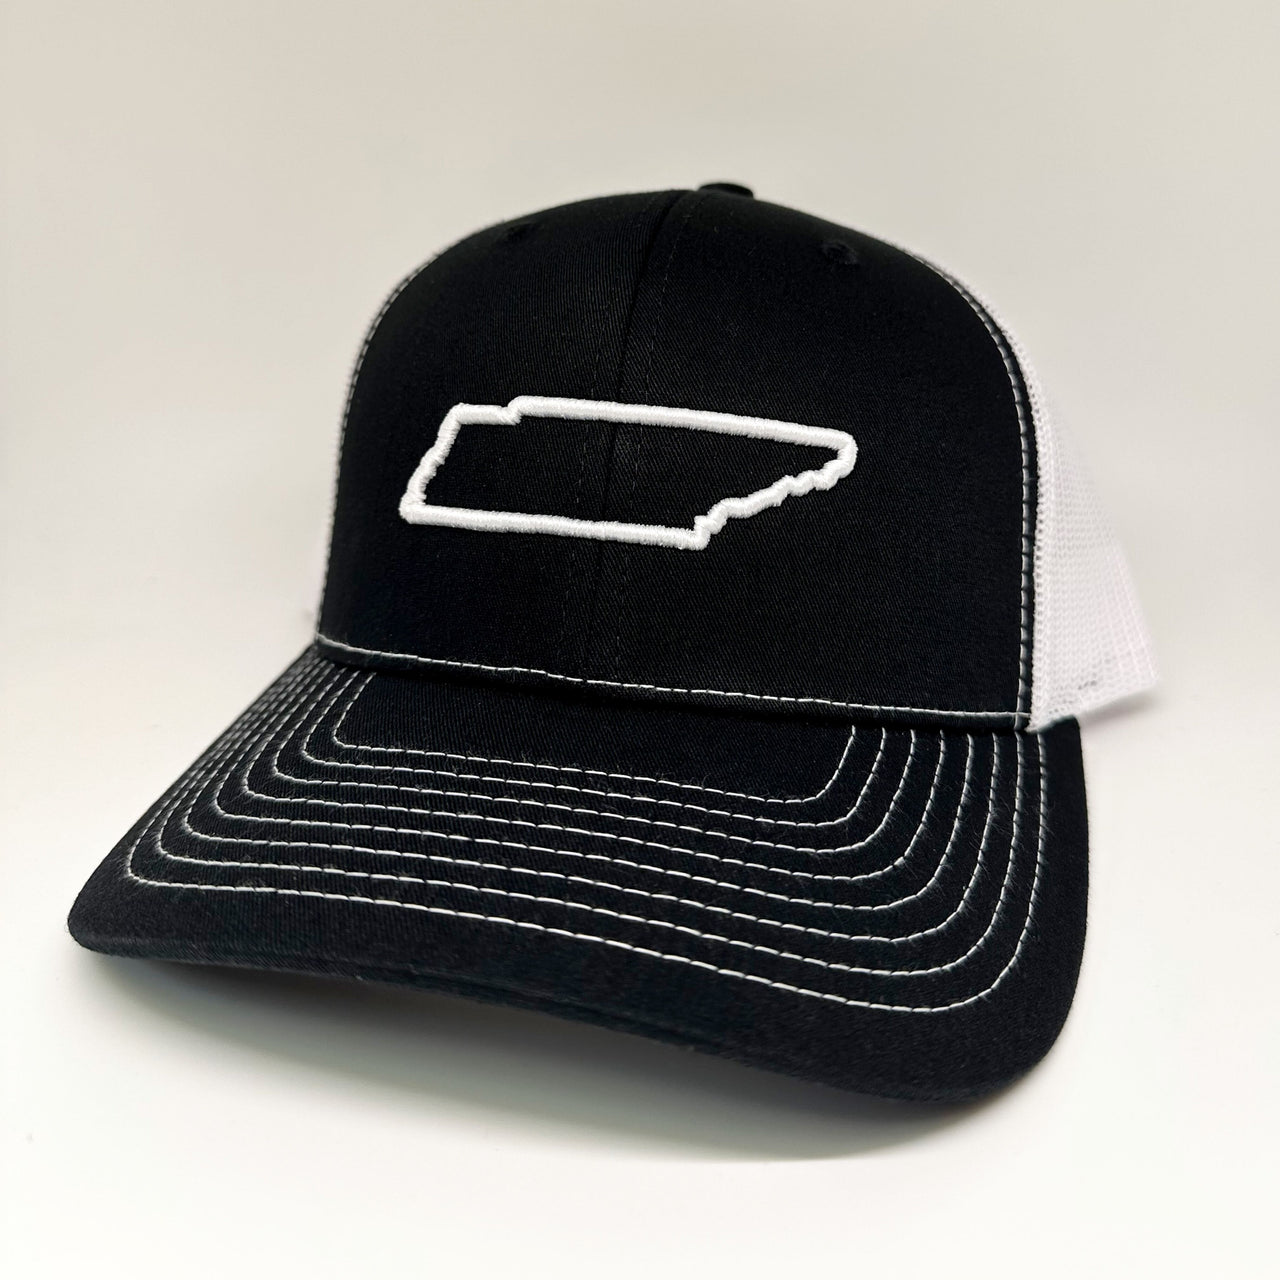 Tennessee Embroidery Hat - Greater Half